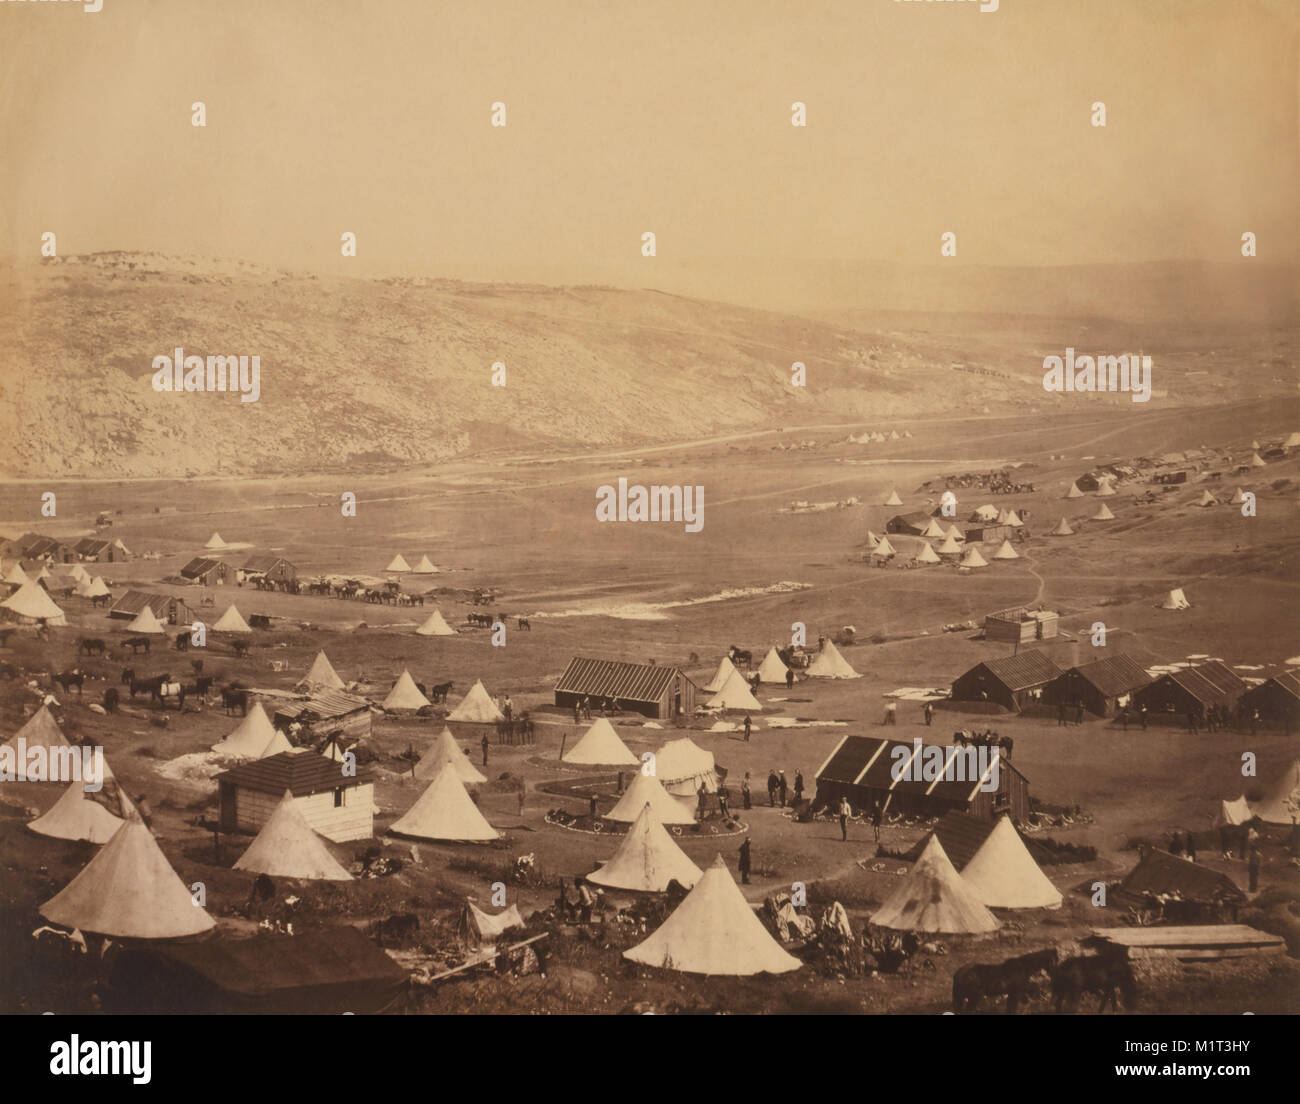 View of British Military Camp with Tents, Buildings, Soldiers and Horses, Crimean War, Crimea, Ukraine, by Roger Fenton, 1855 Stock Photo